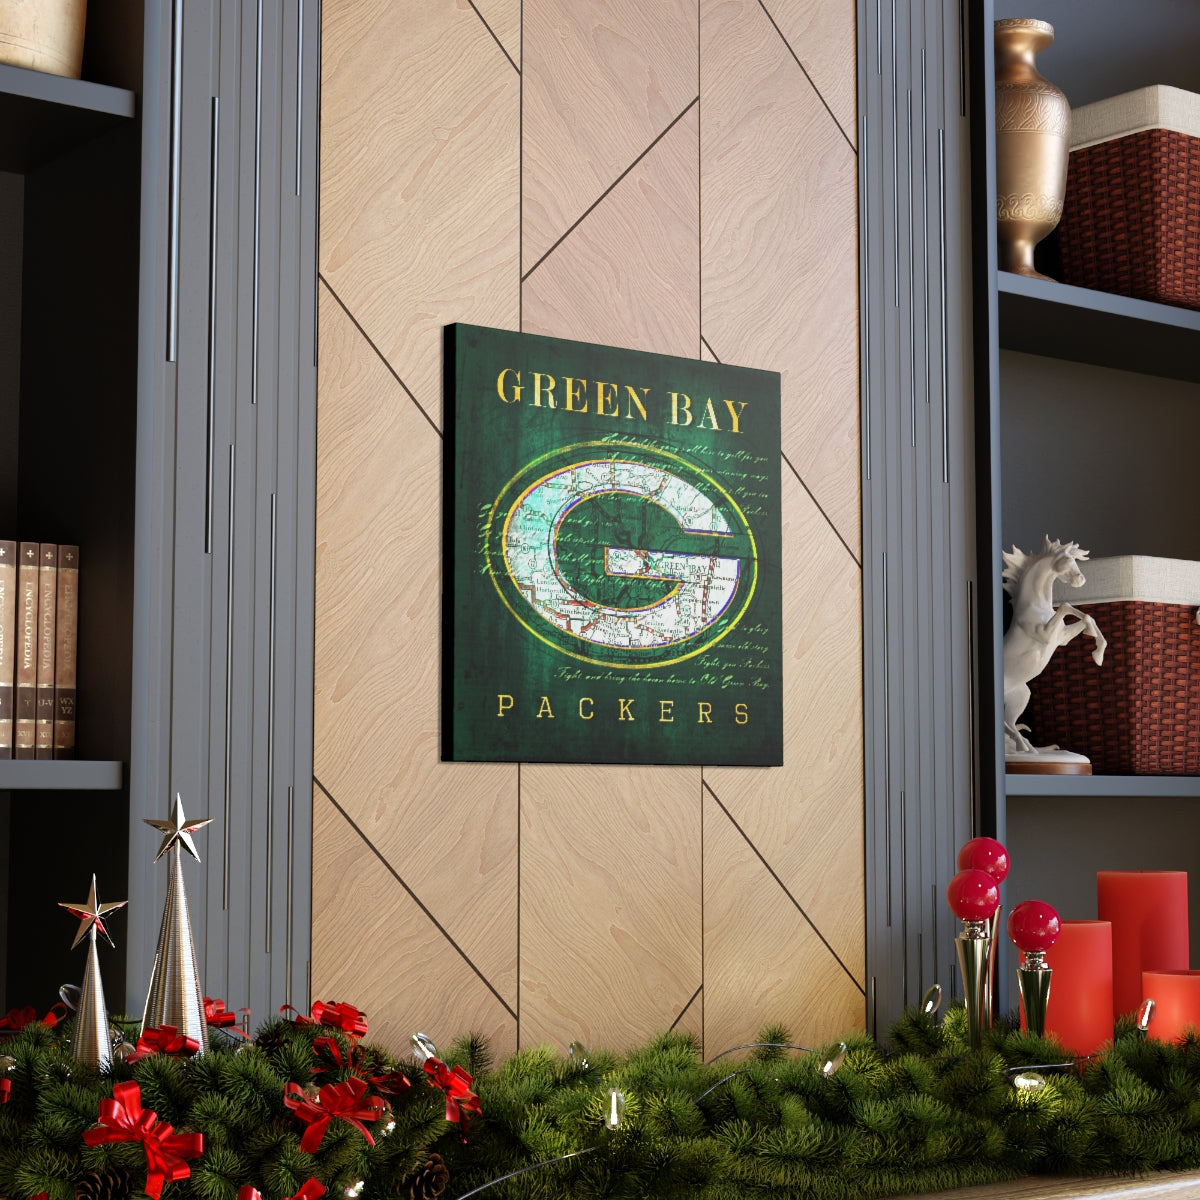 Green Bay Packers Vintage Canvas Map